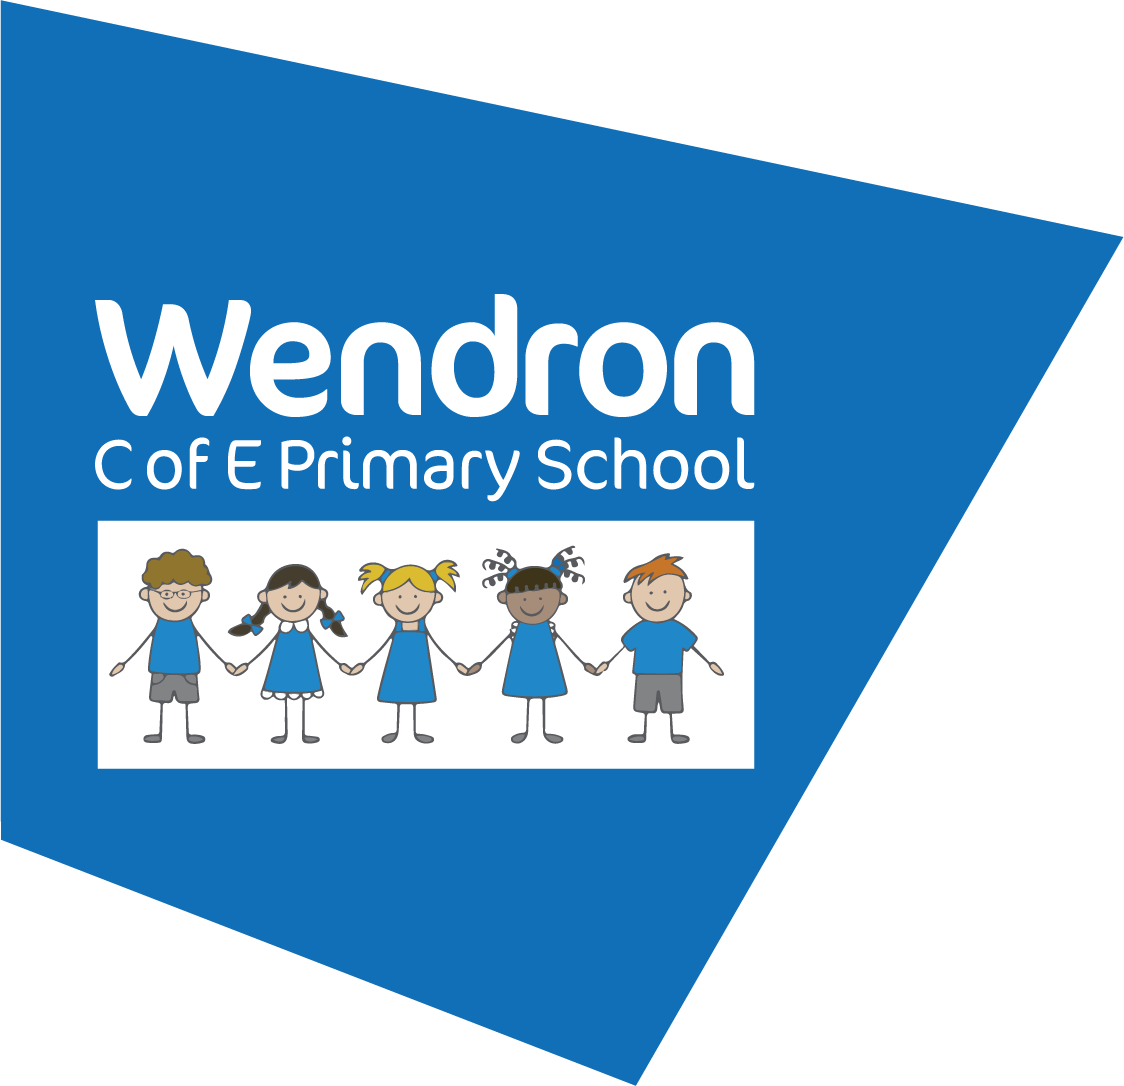 Wendron Church of England Primary School